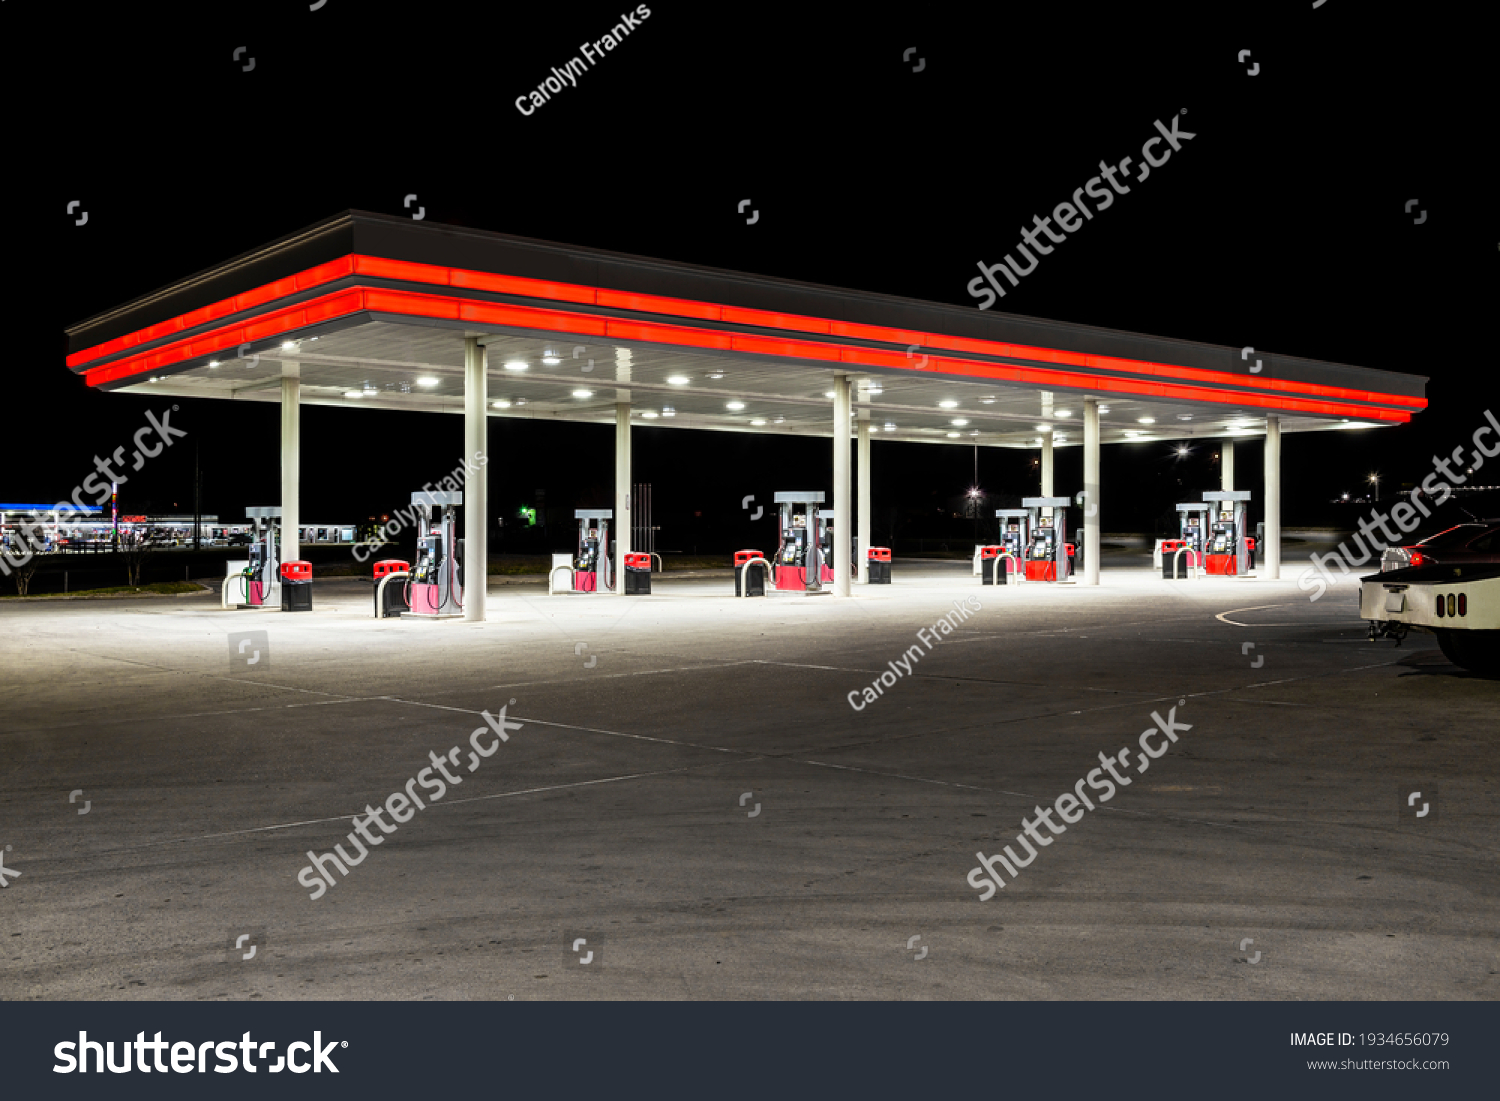 Horizontal shot of a generic unbranded gas station at night with copy space at the top and bottom. #1934656079